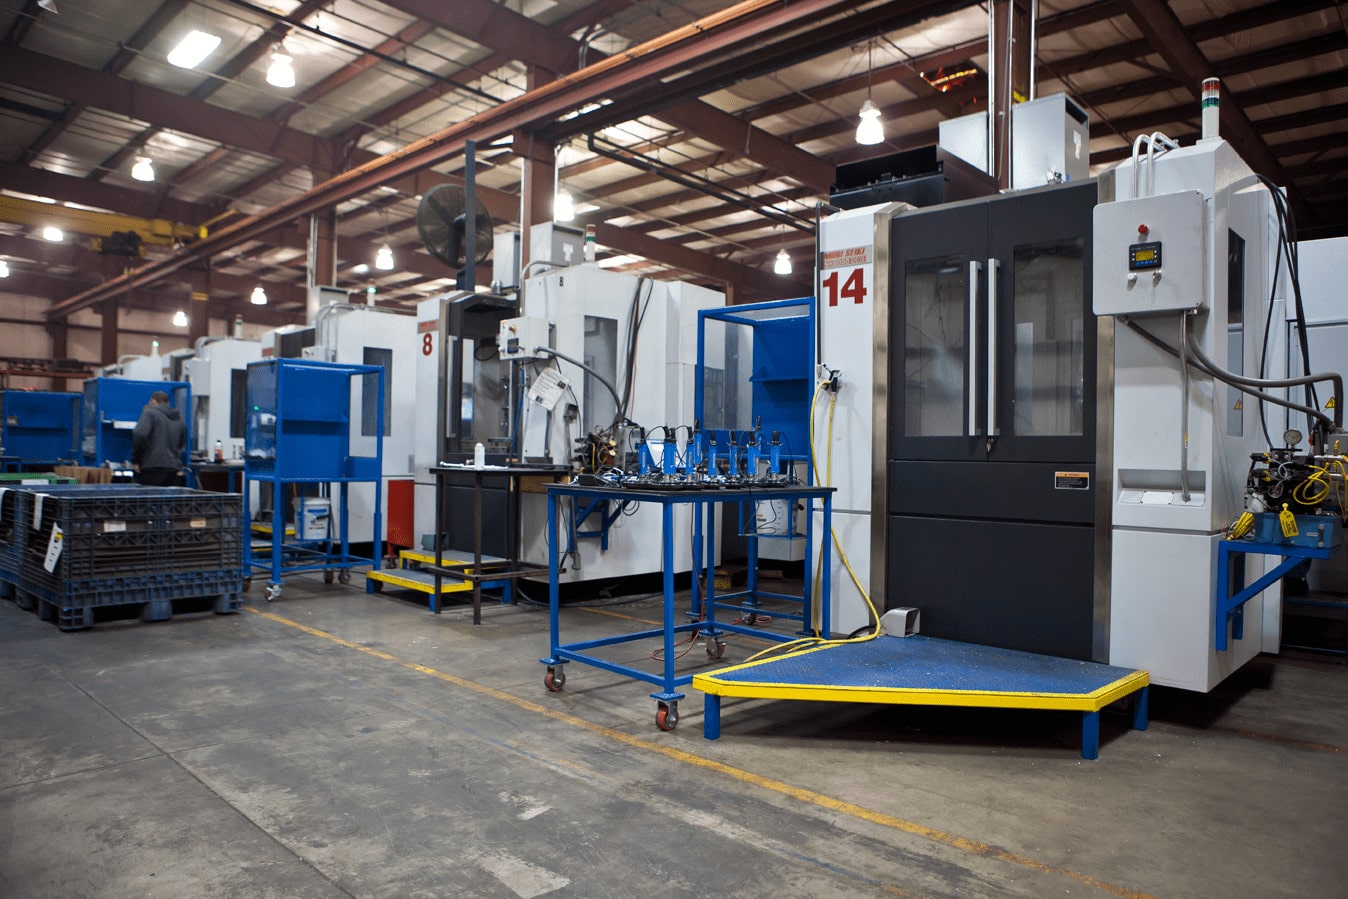 CNC Machining at Le Claire Manufacturing in Iowa. With both casting and machining services, LeClaire is a full-service foundry